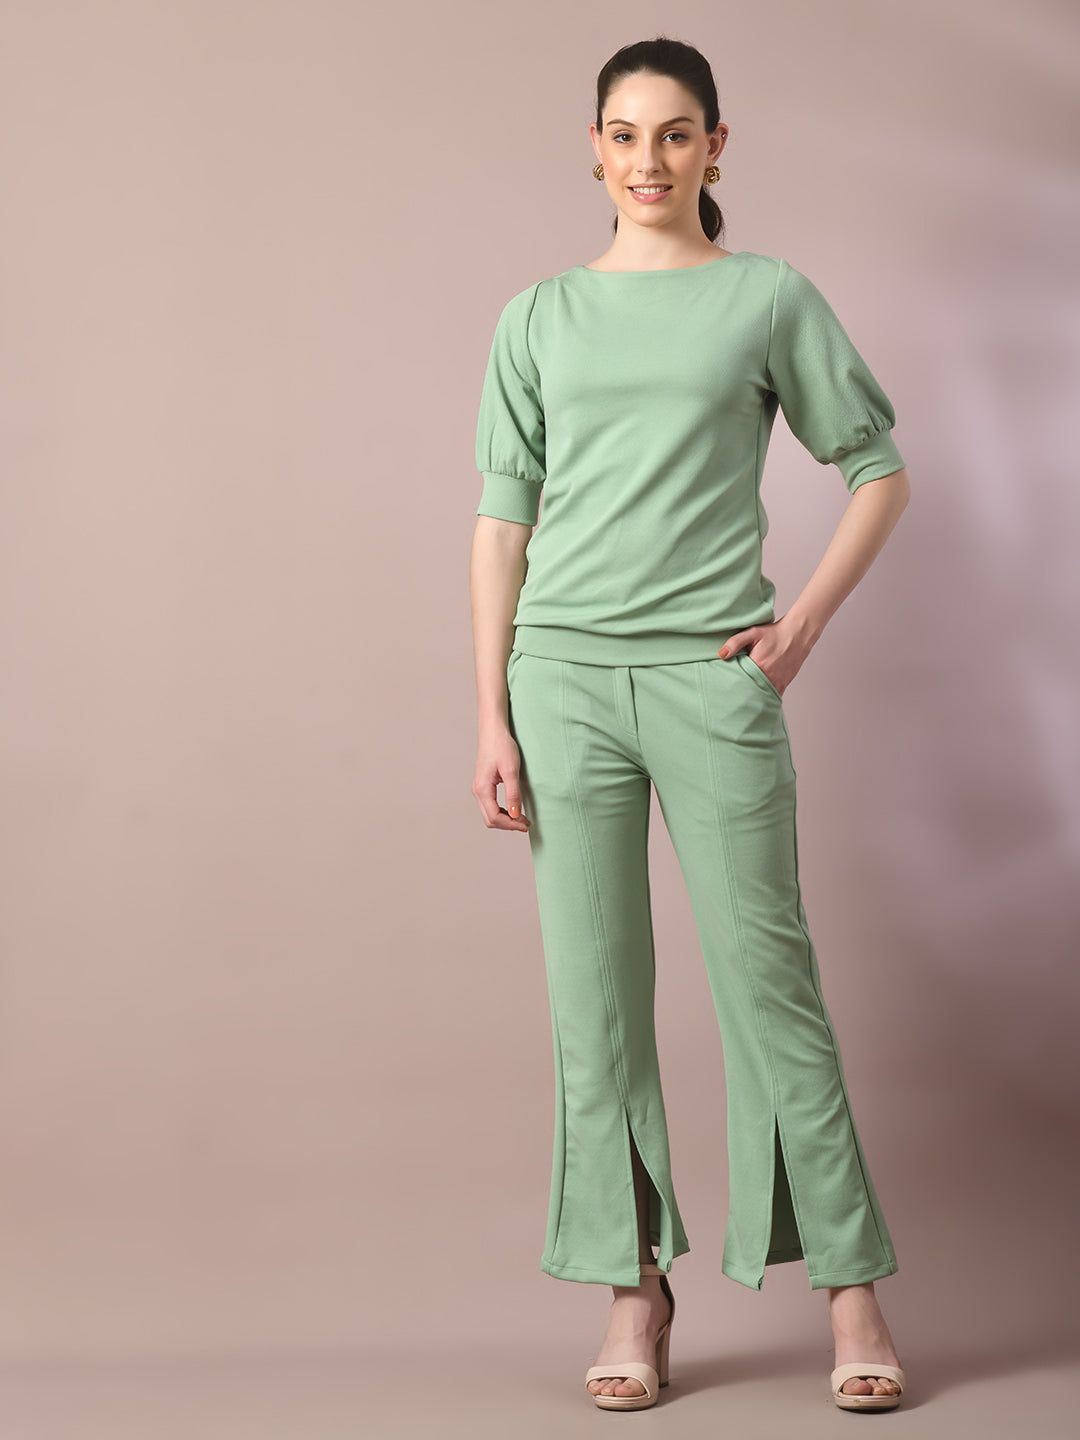 Women's  Sea Green Solid Boat Neck Party Top With Trousers Co-Ord Set  - Myshka